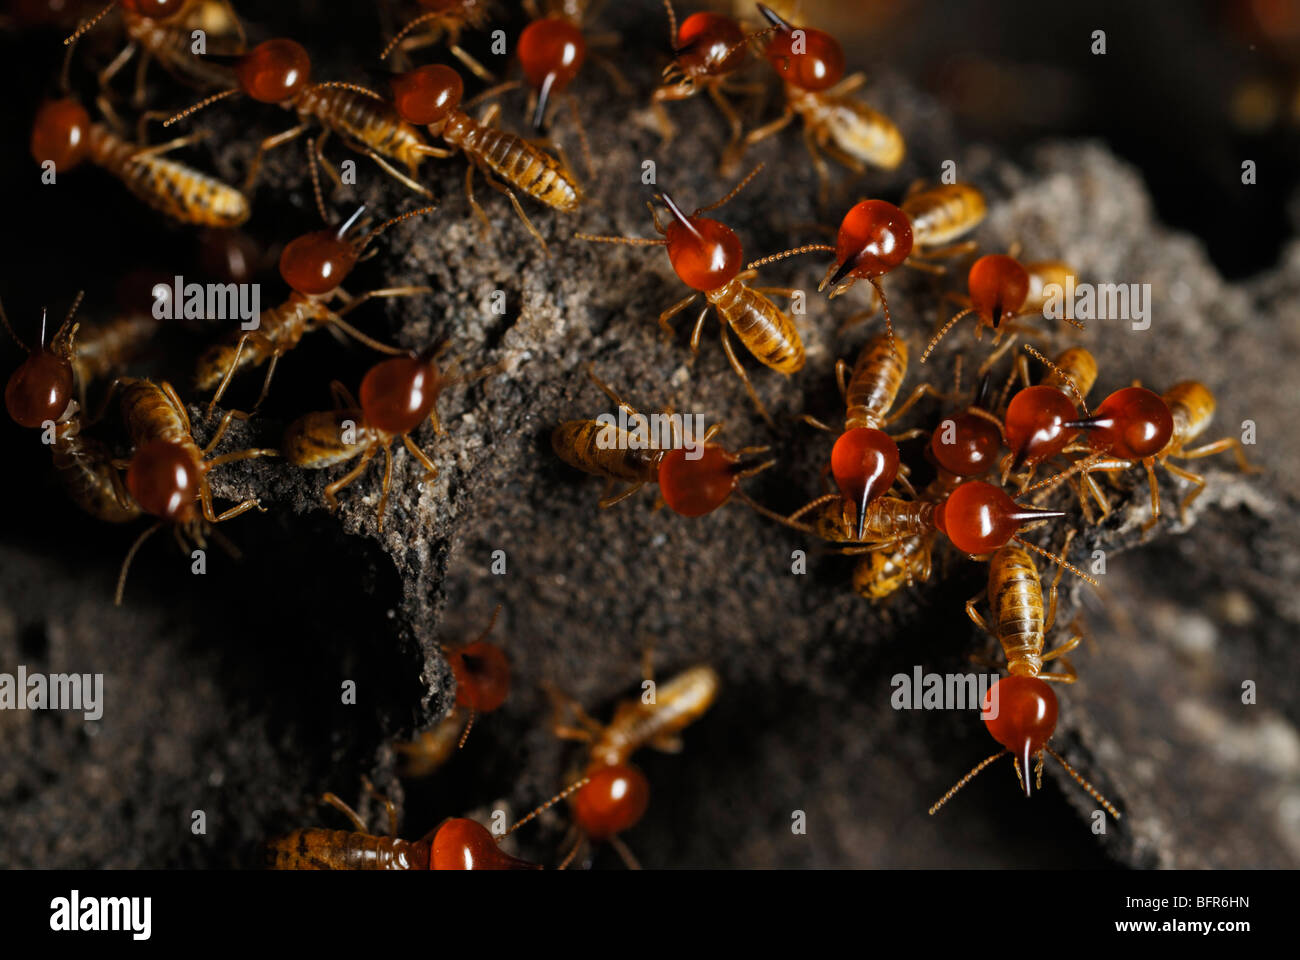 Soldier snouted termites Stock Photo